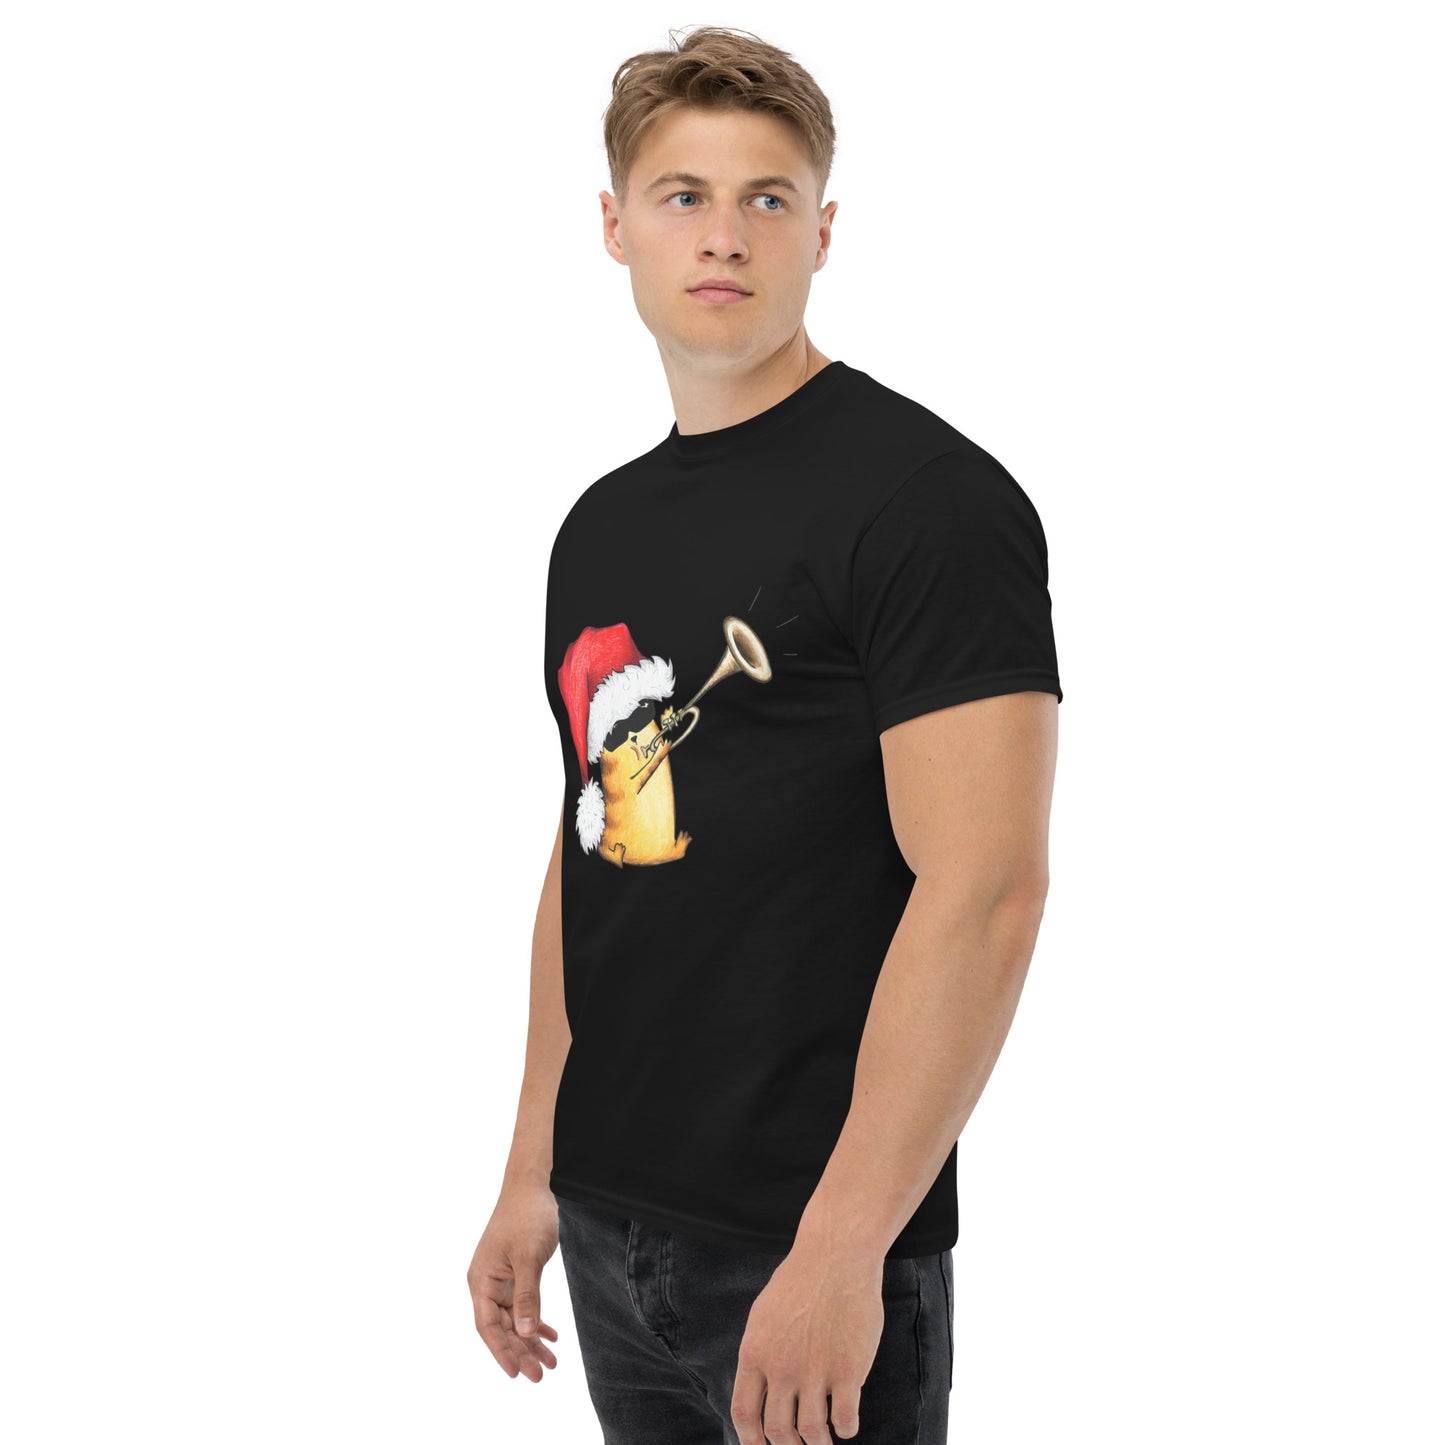 Men's T-shirt "Christmas Cat with Trumpet"